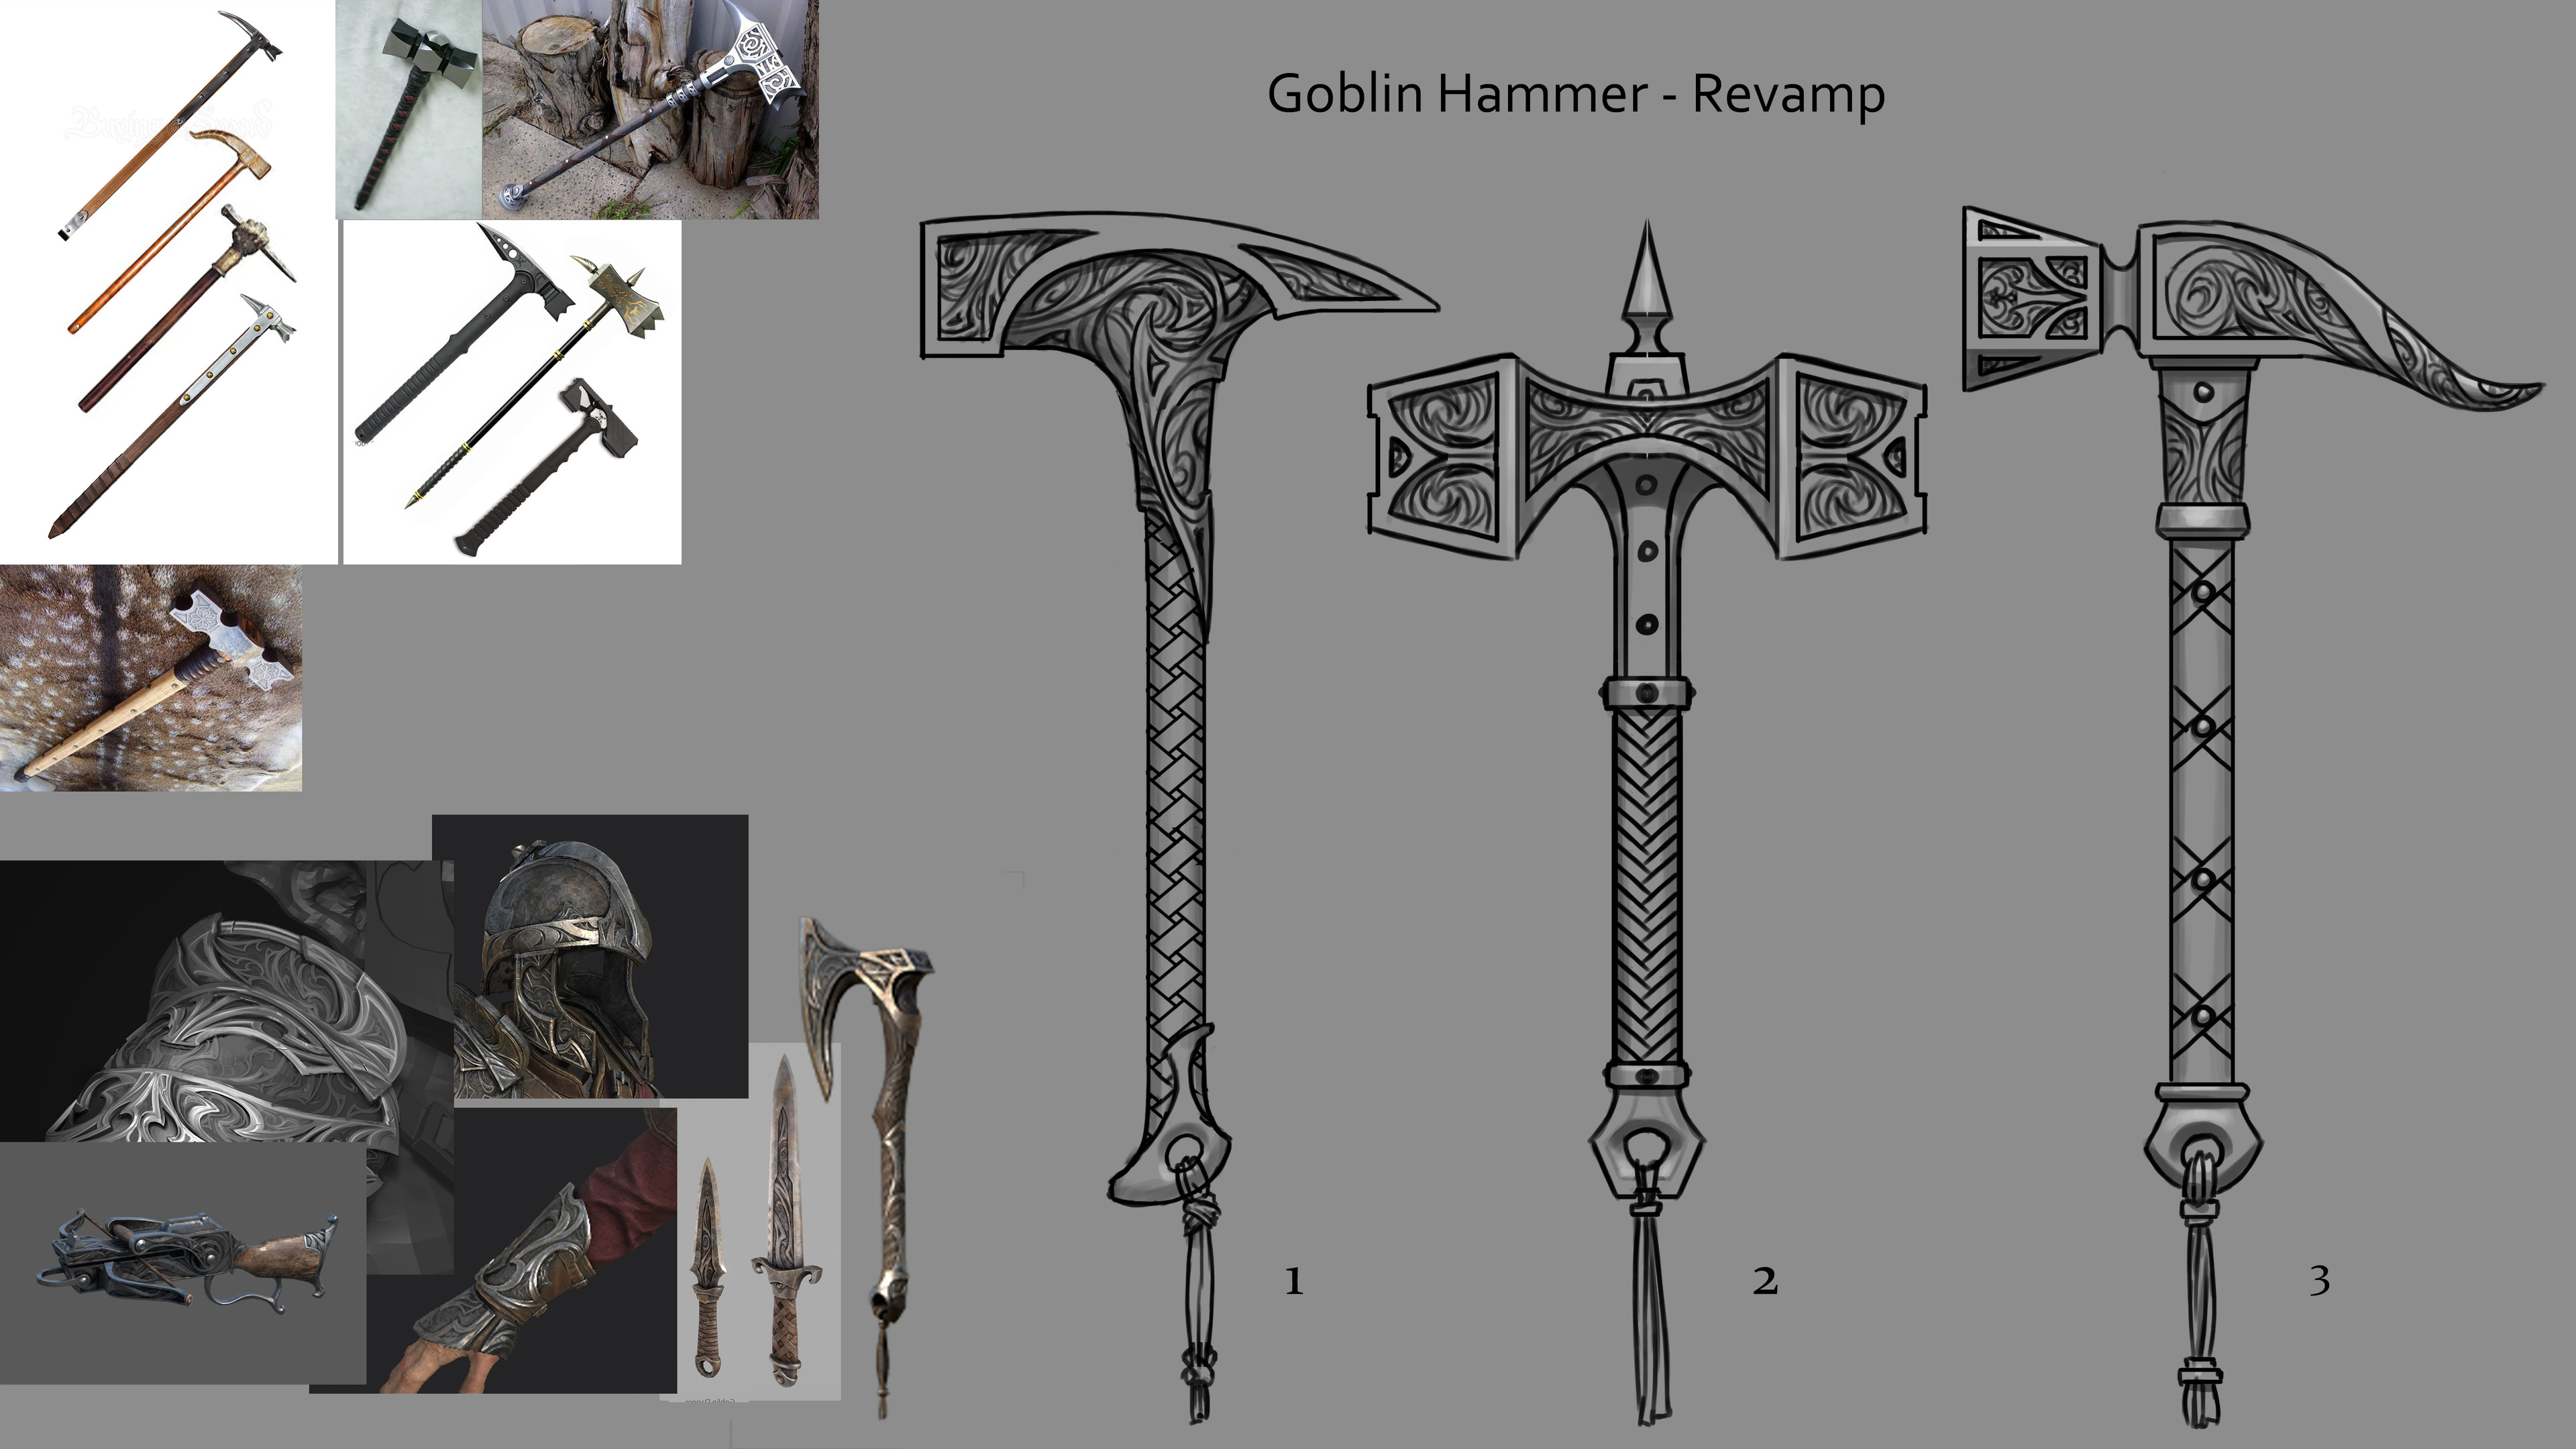 Hammer shape exploration and concepts. Trying to find bold and unique shapes that would go along with the armor. 